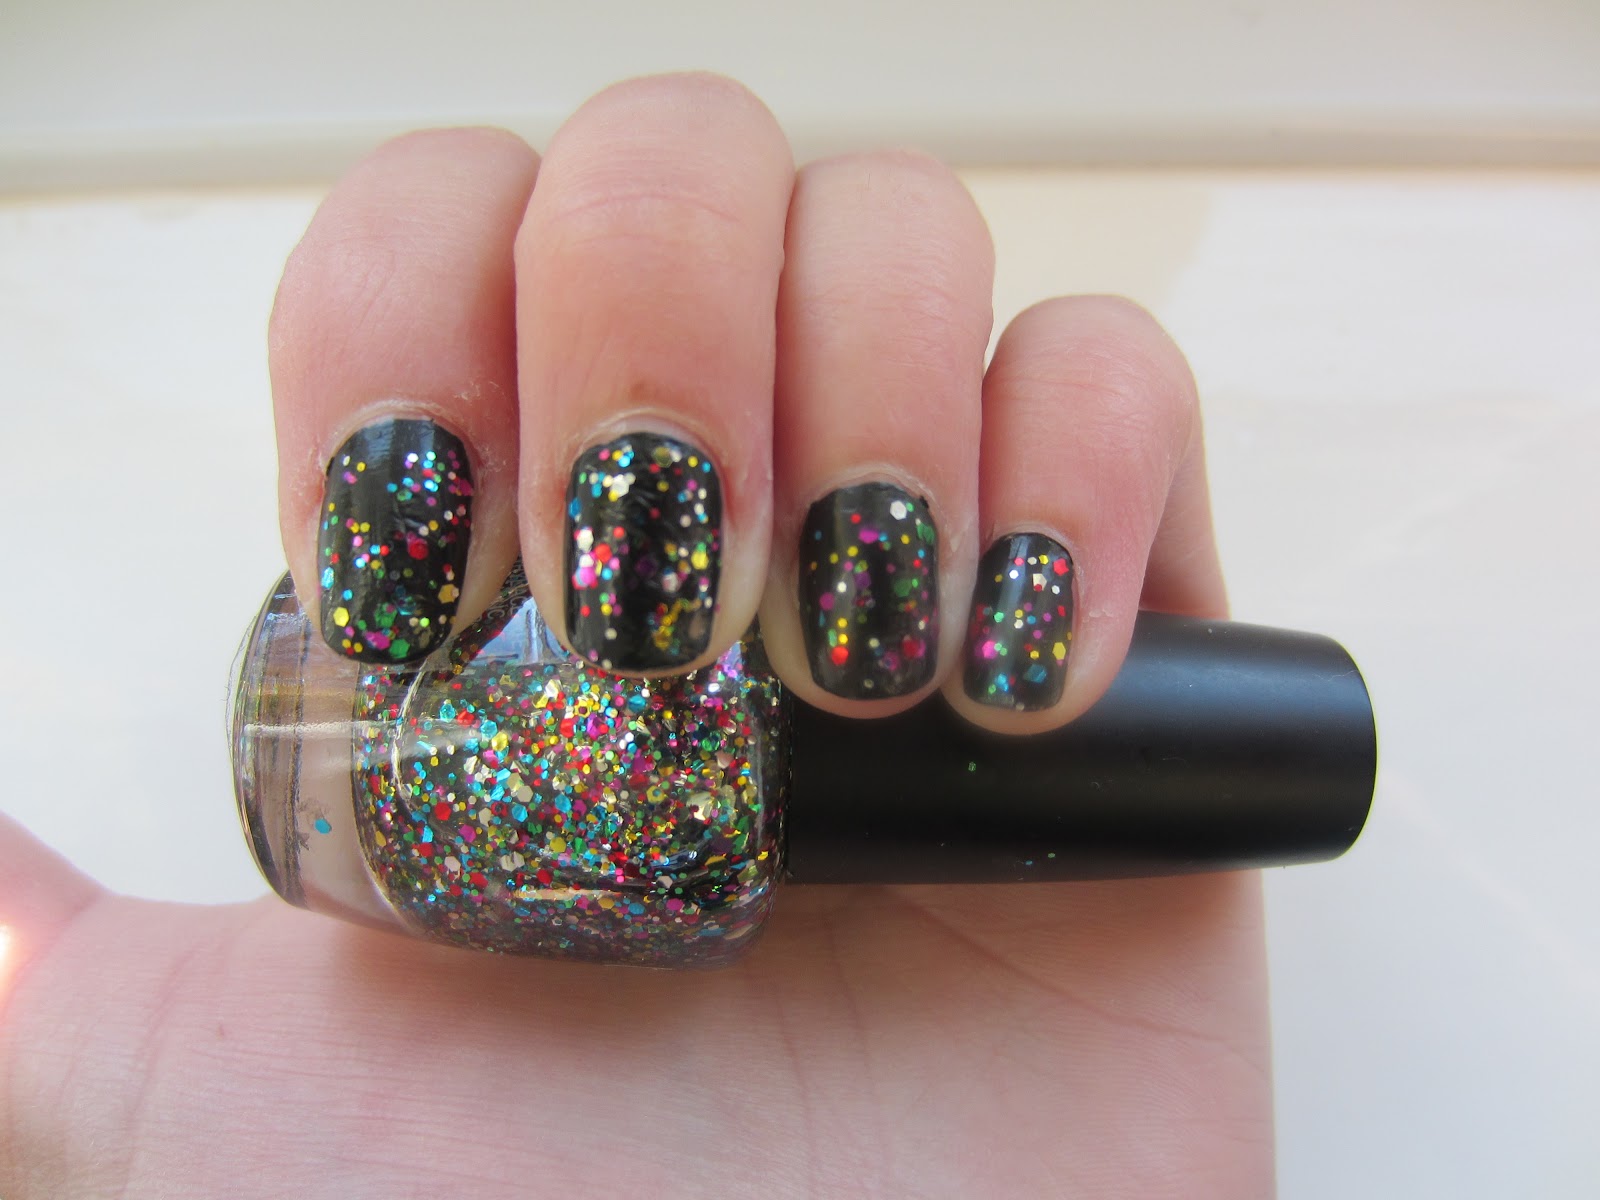 5. Colorful disco nails - wide 7